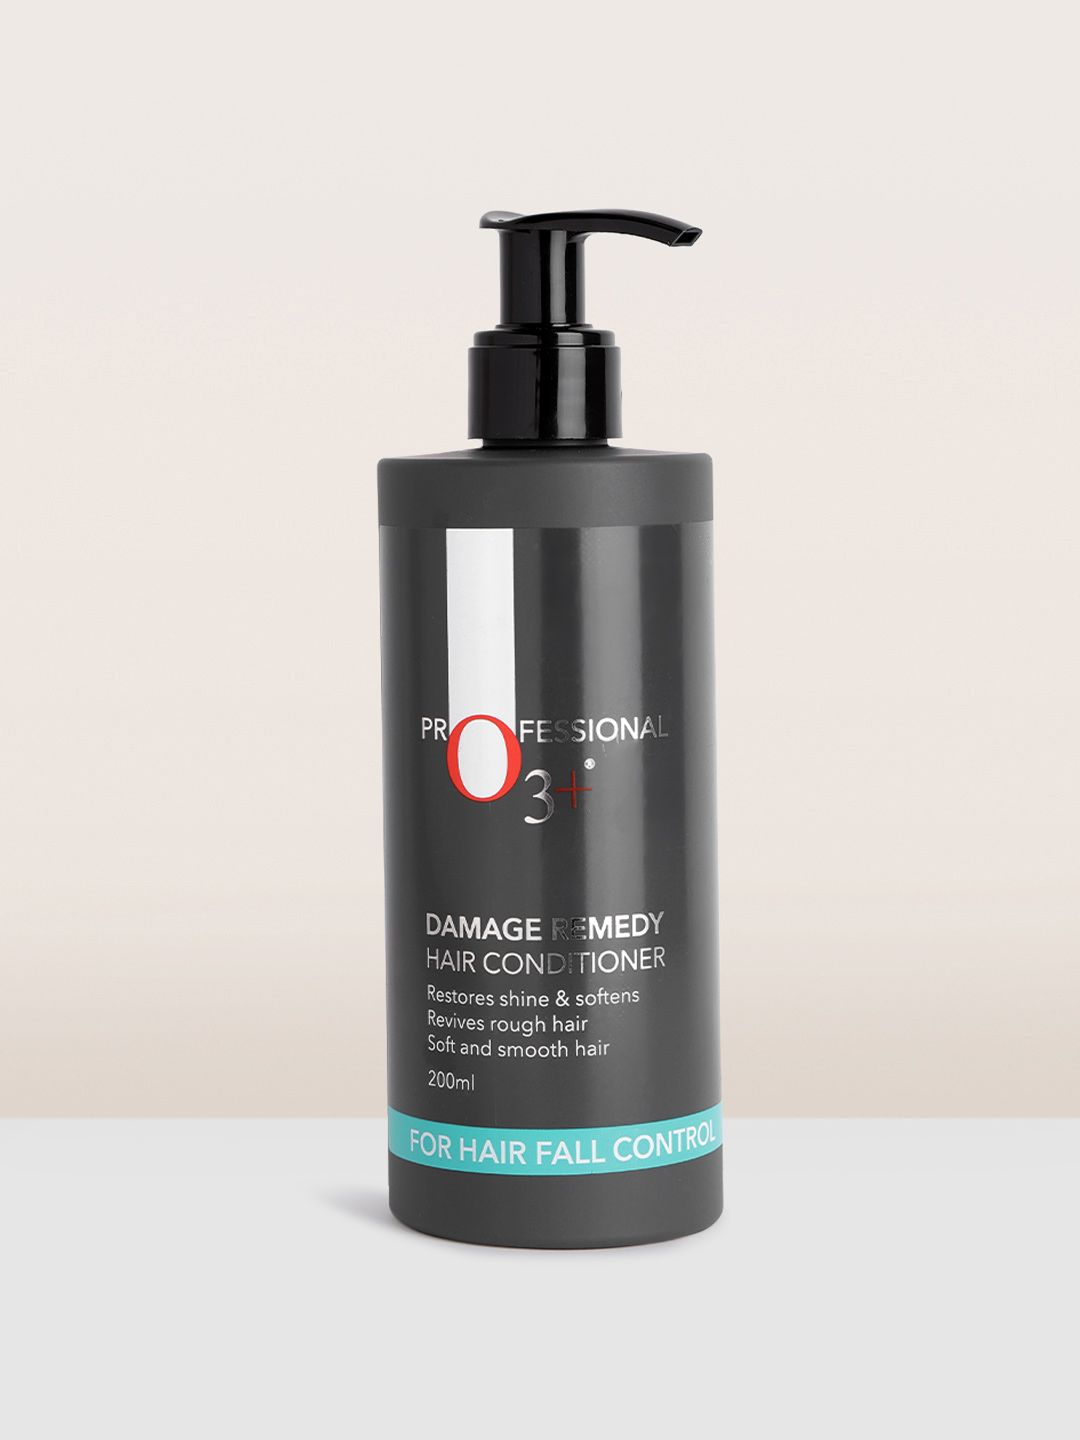 O3 Professional Damage Remedy Hair Conditioner with Citric Acid 200 ml Price in India